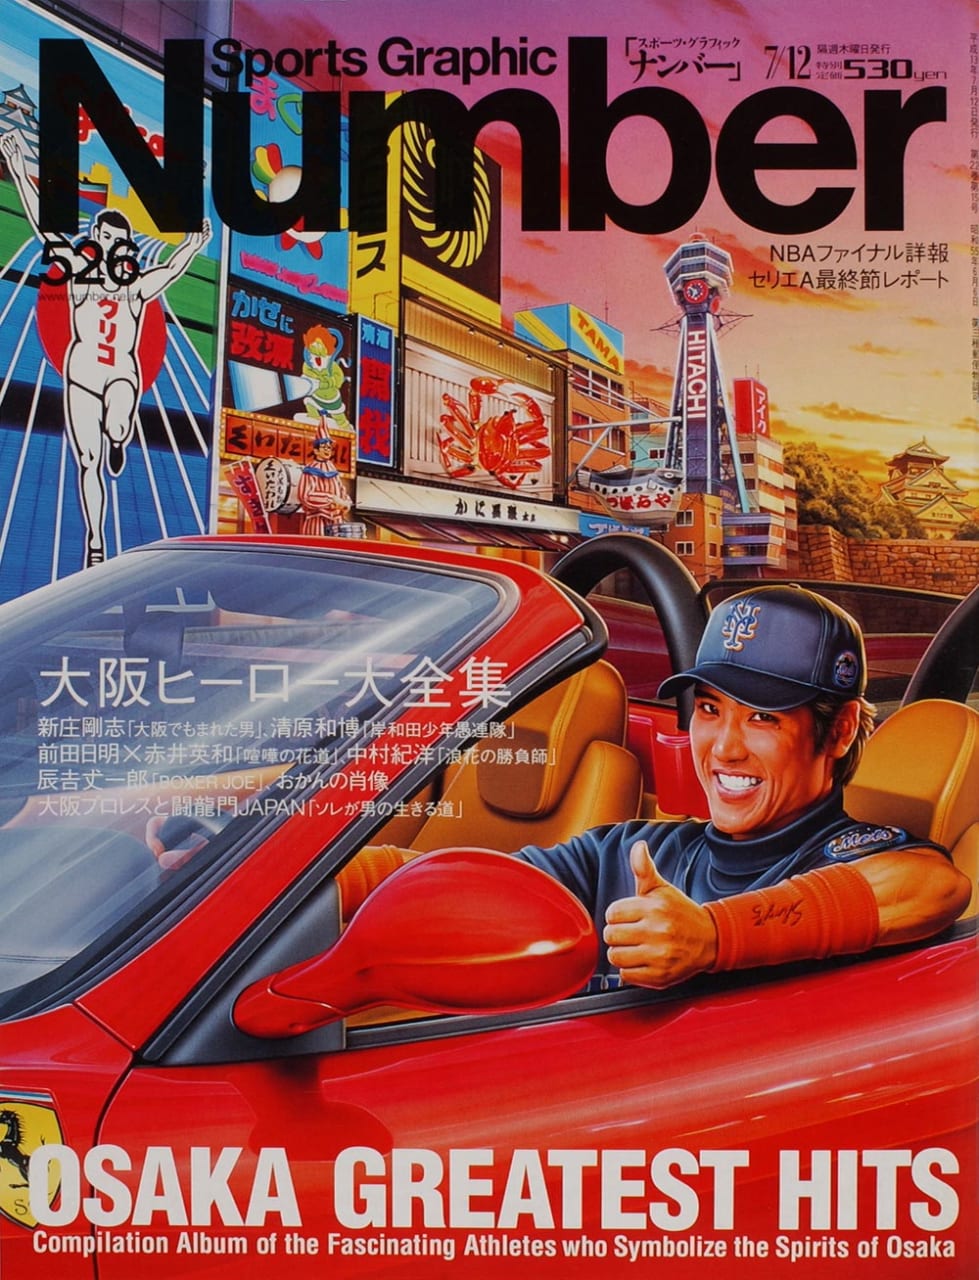 Sports Graphic Number 526号
2001年6月28日発売
表紙イラスト：斎藤力